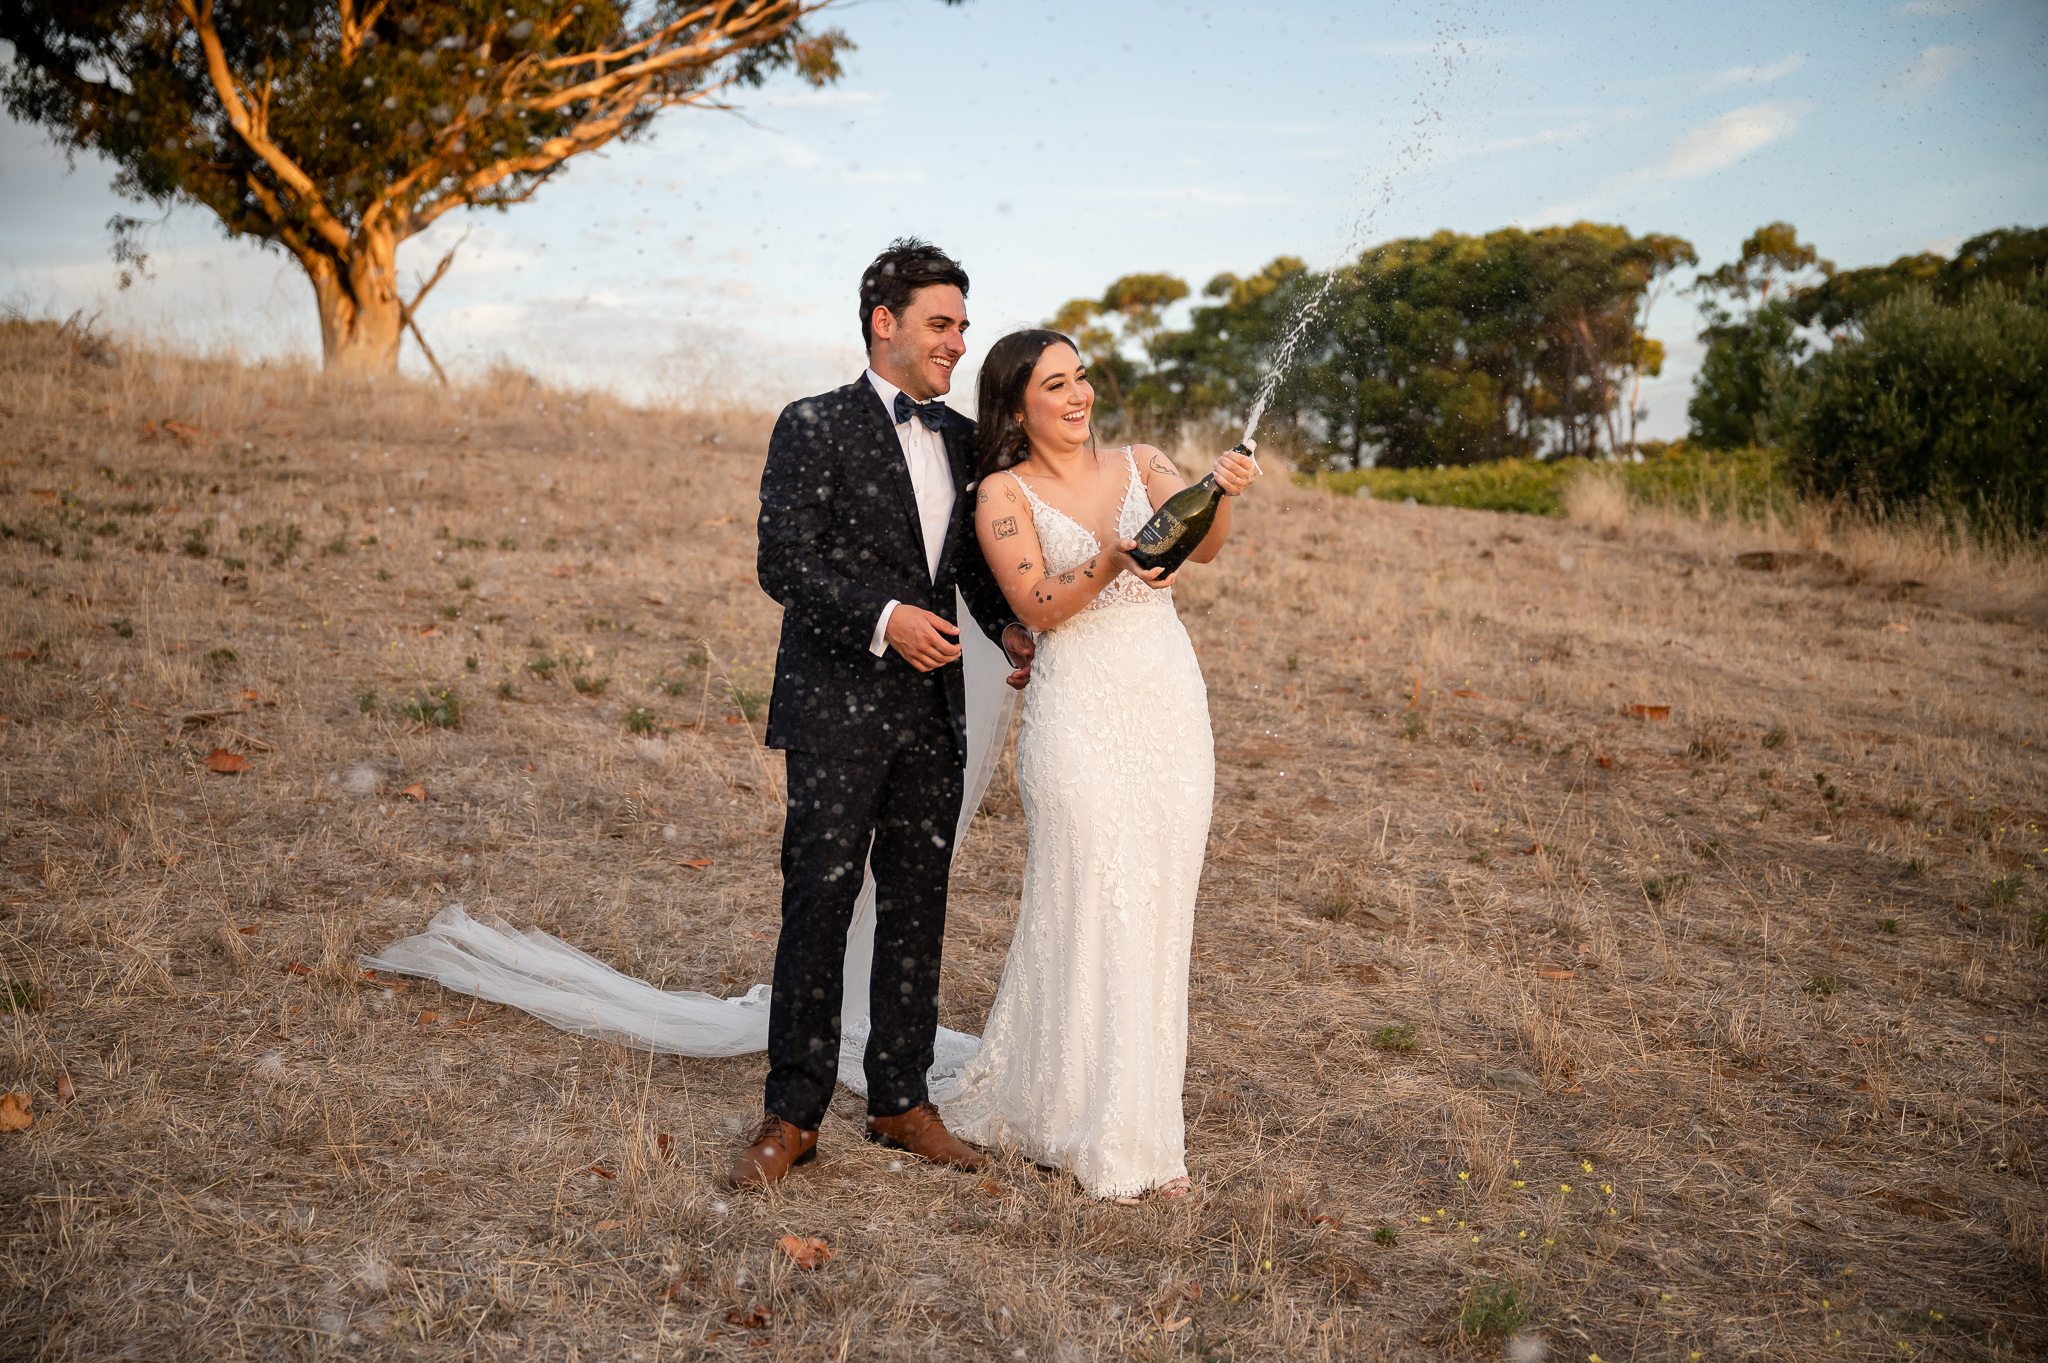 Wedding Photography Prices in Adelaide and South Australia with Wilson and Lewis